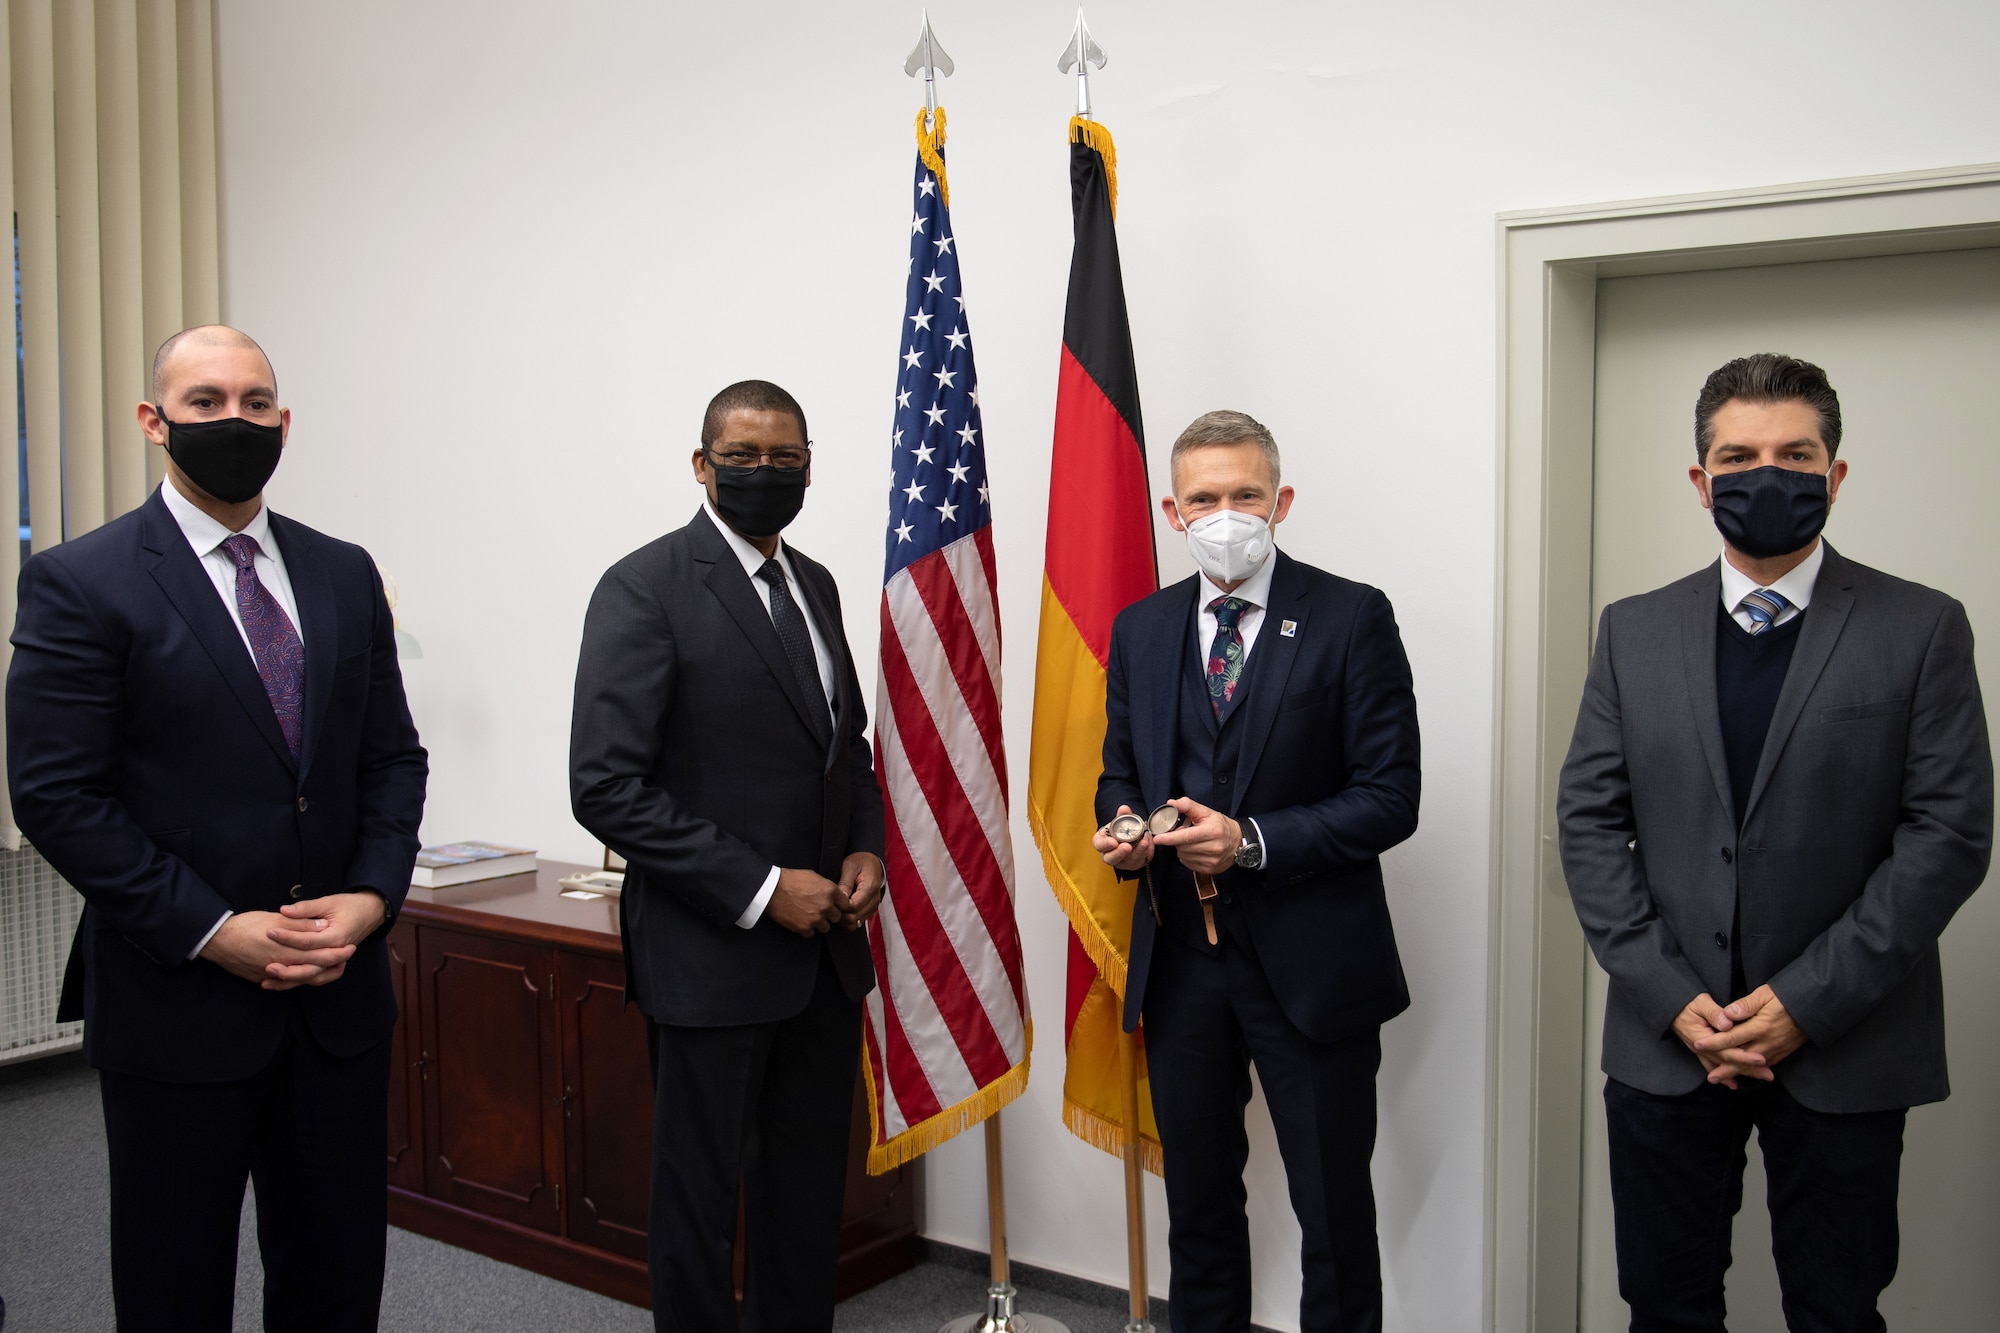 Four men standing around the American and German flags.